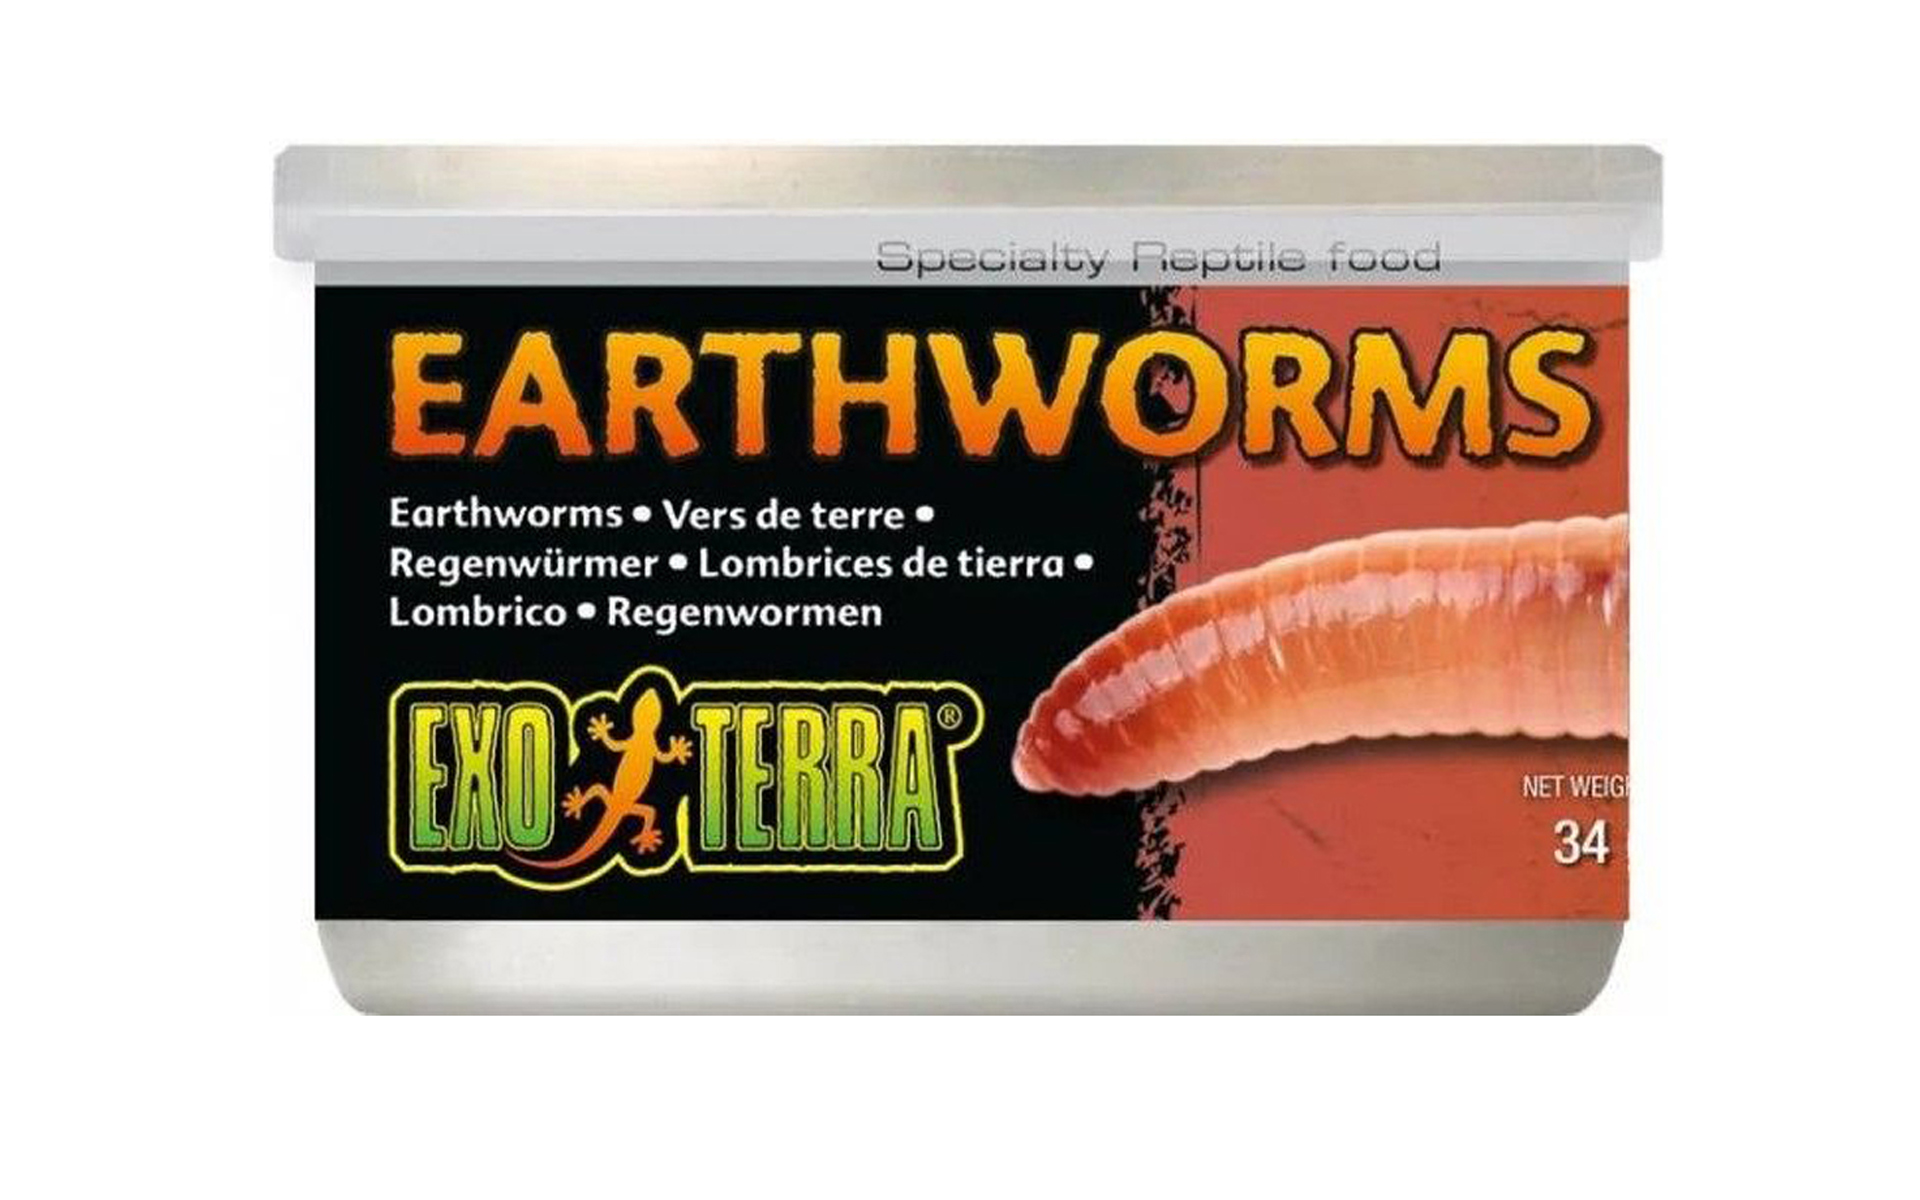 Canned Earthworms Specialty Reptile Food, 1.2 oz